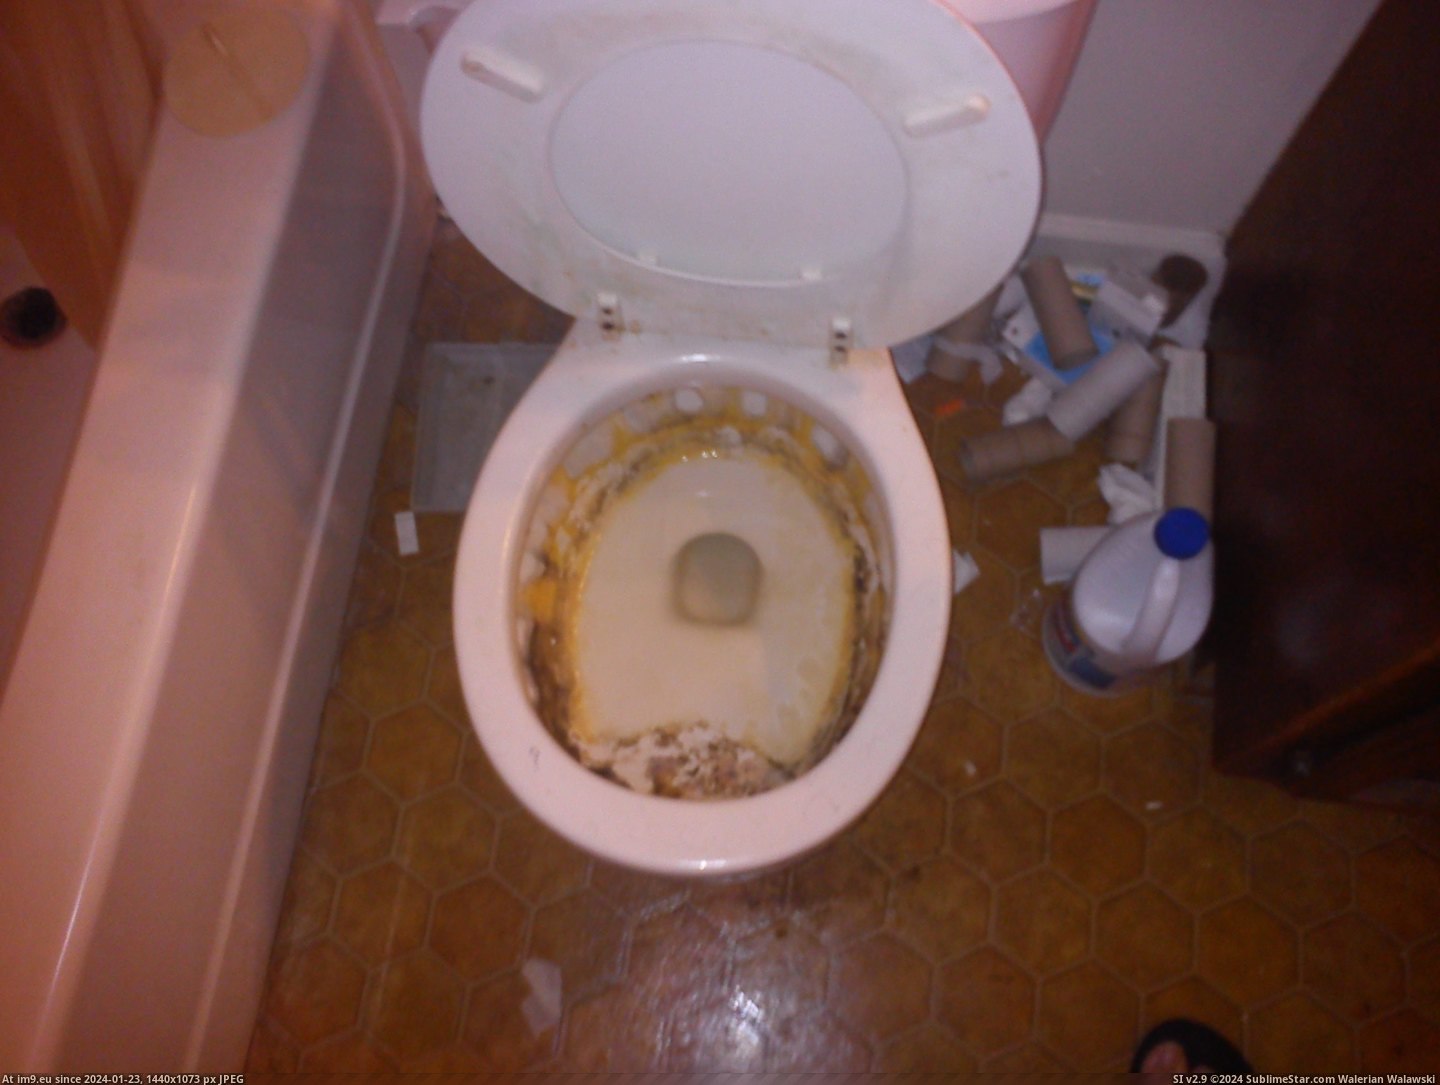 #Wtf #Summer #Roommate #Lives #Asked #Clean [Wtf] This is how my roommate lives. We've asked him to clean it since last summer, and he doesn't want to do it without help. H Pic. (Obraz z album My r/WTF favs))